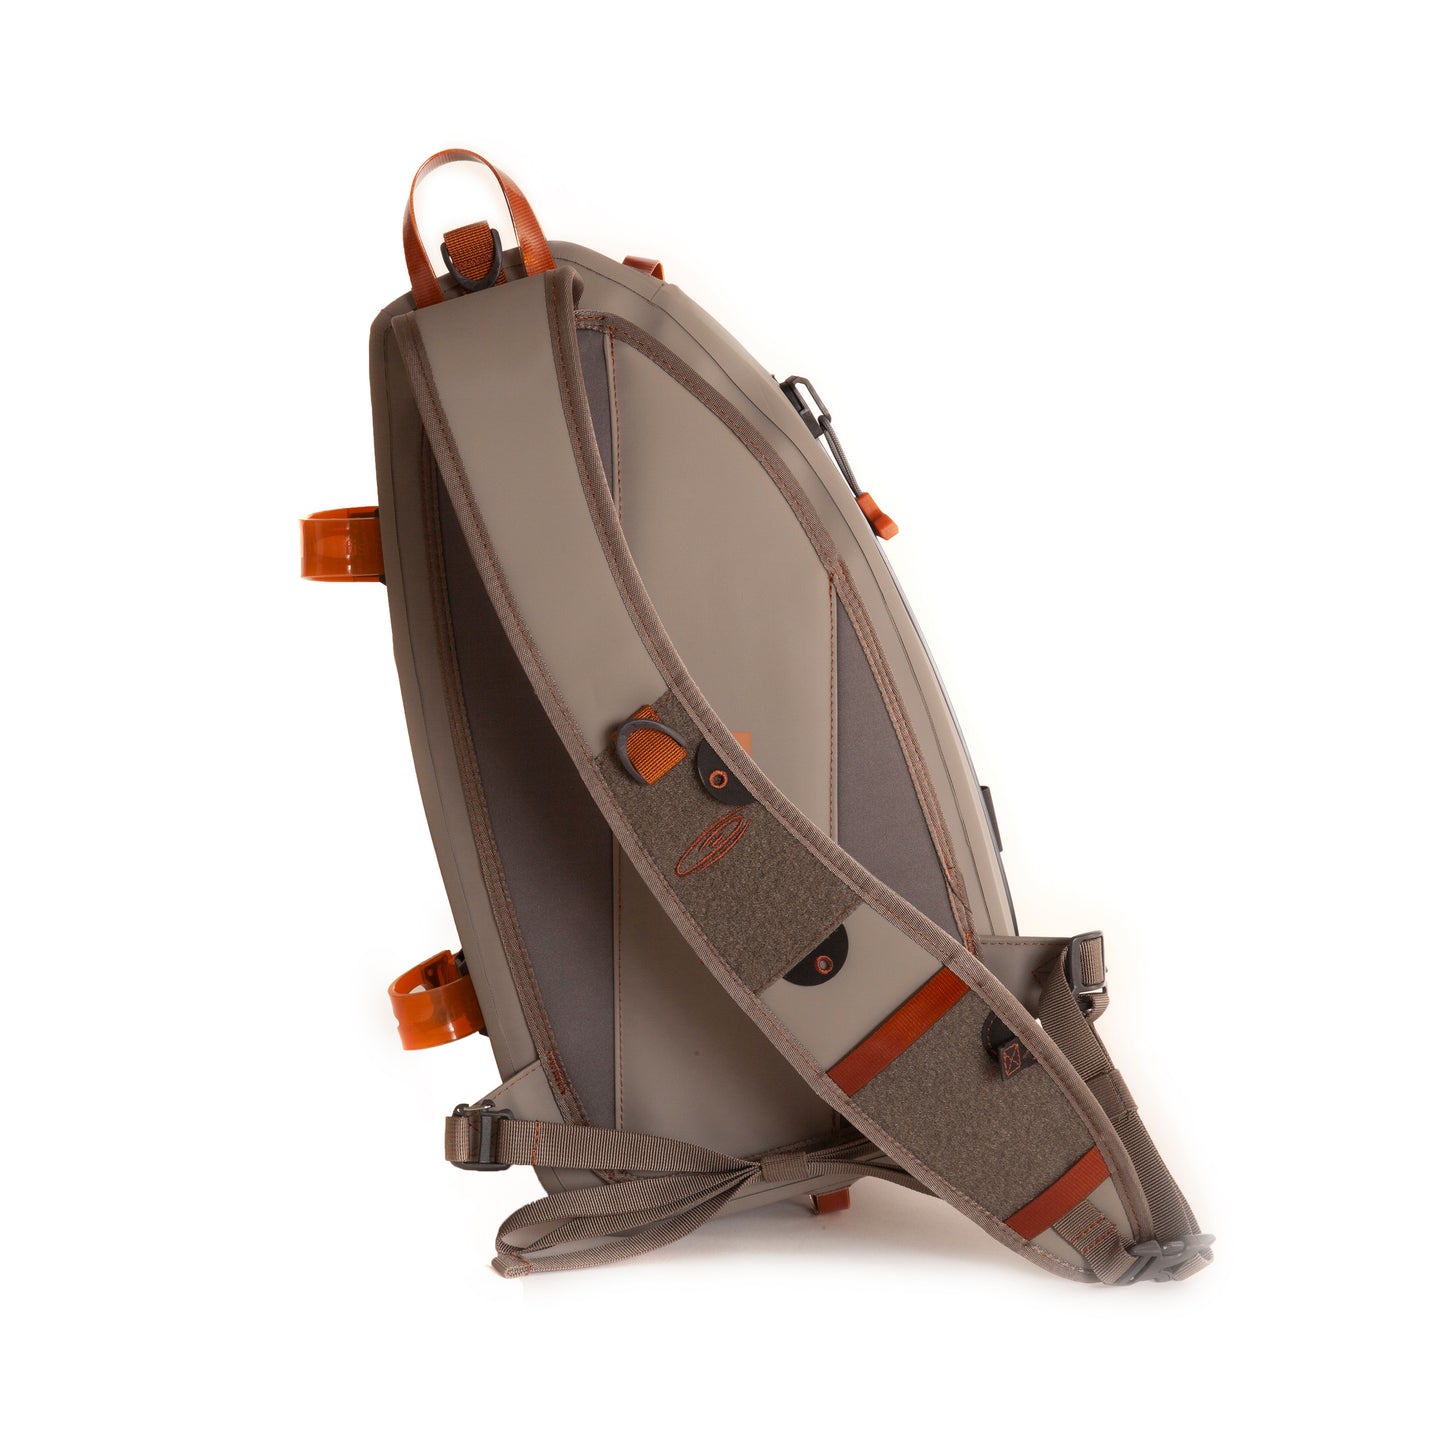 Fishpond - Thunderhead Submersible Chest Pack Eco